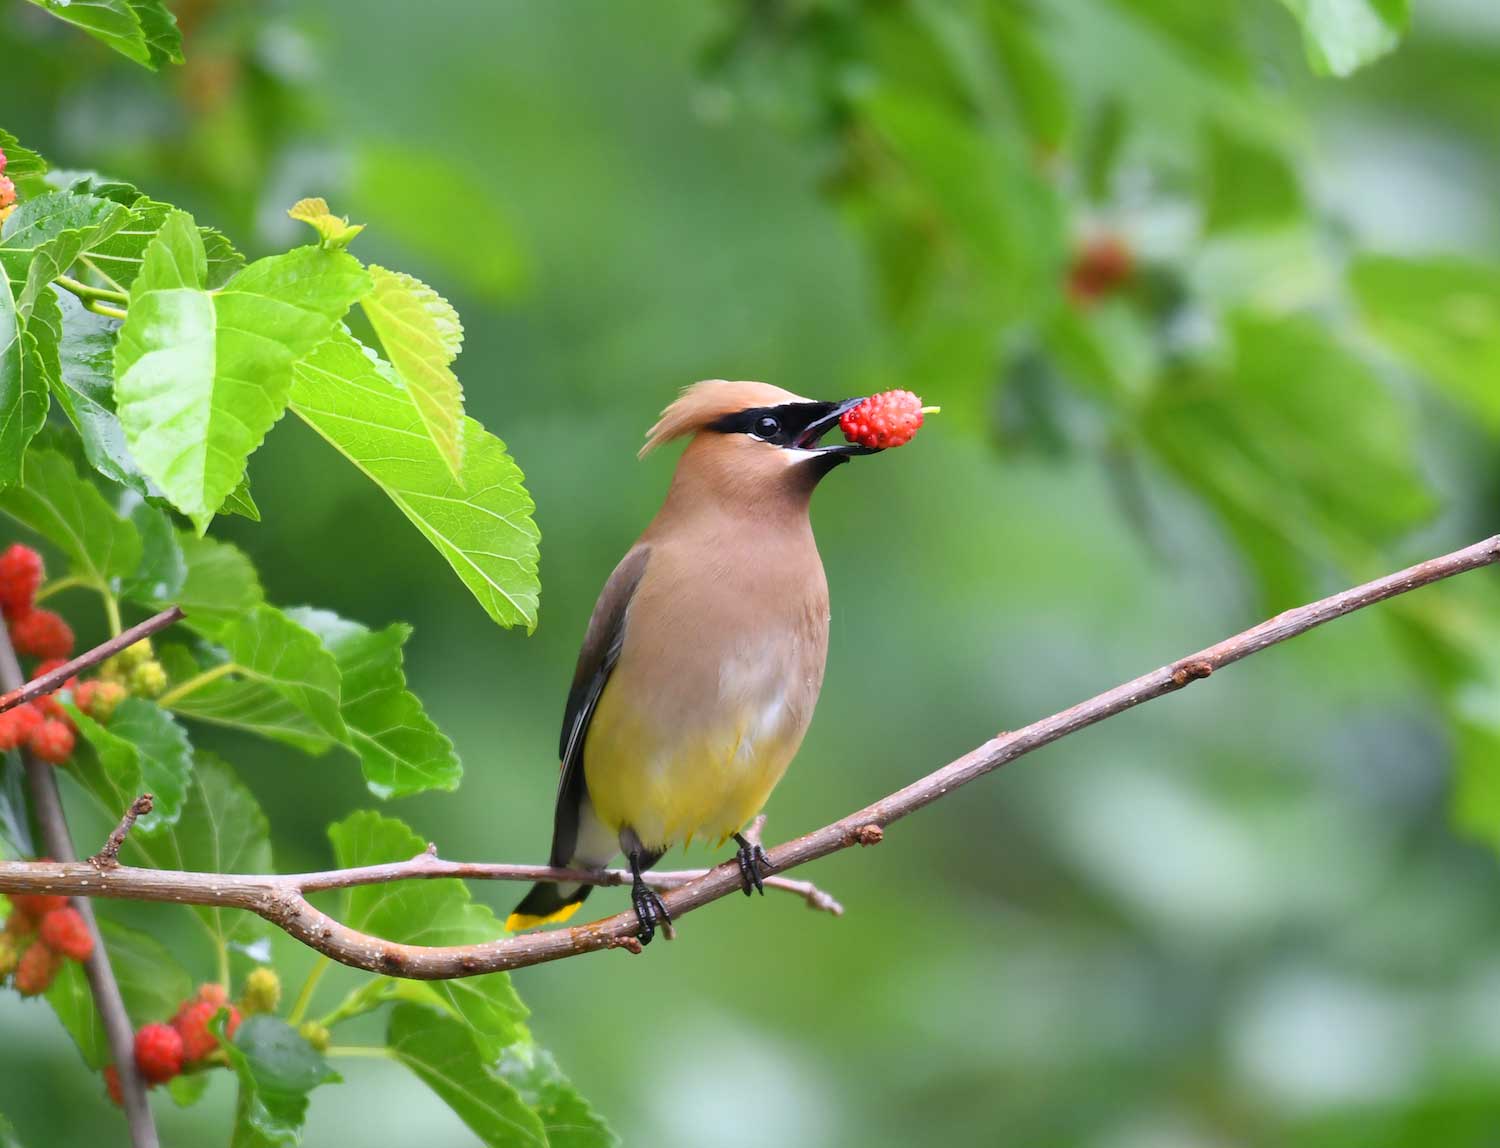 A cedar waxwing perched on a branch with fruit in its mouth.